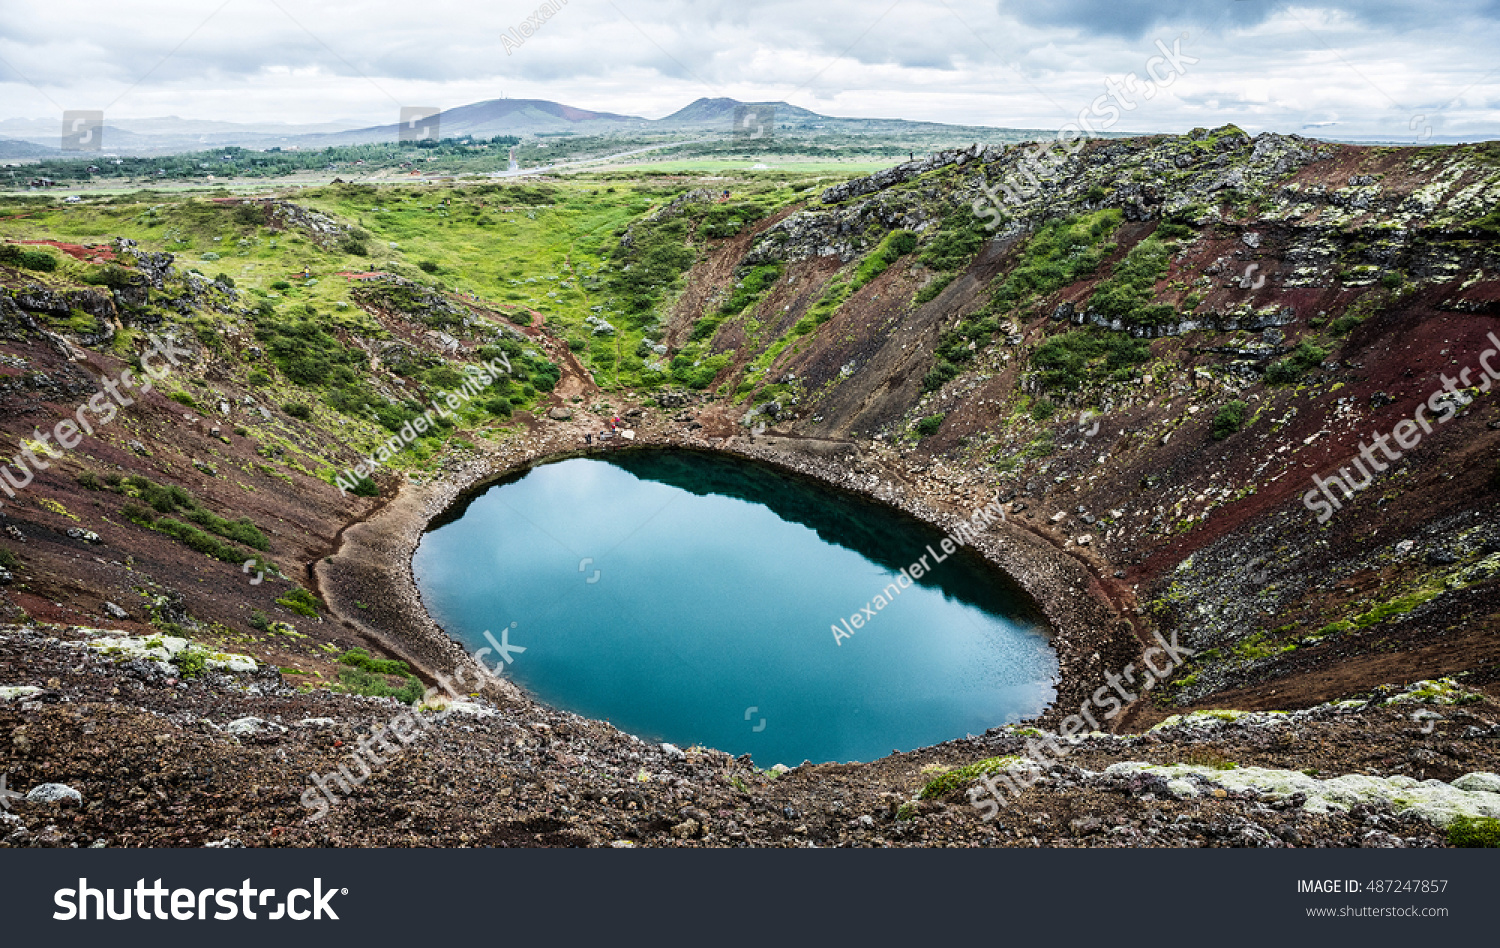 Kerid volcanic crater lake on the touristic golden circle route in Iceland in summer #487247857